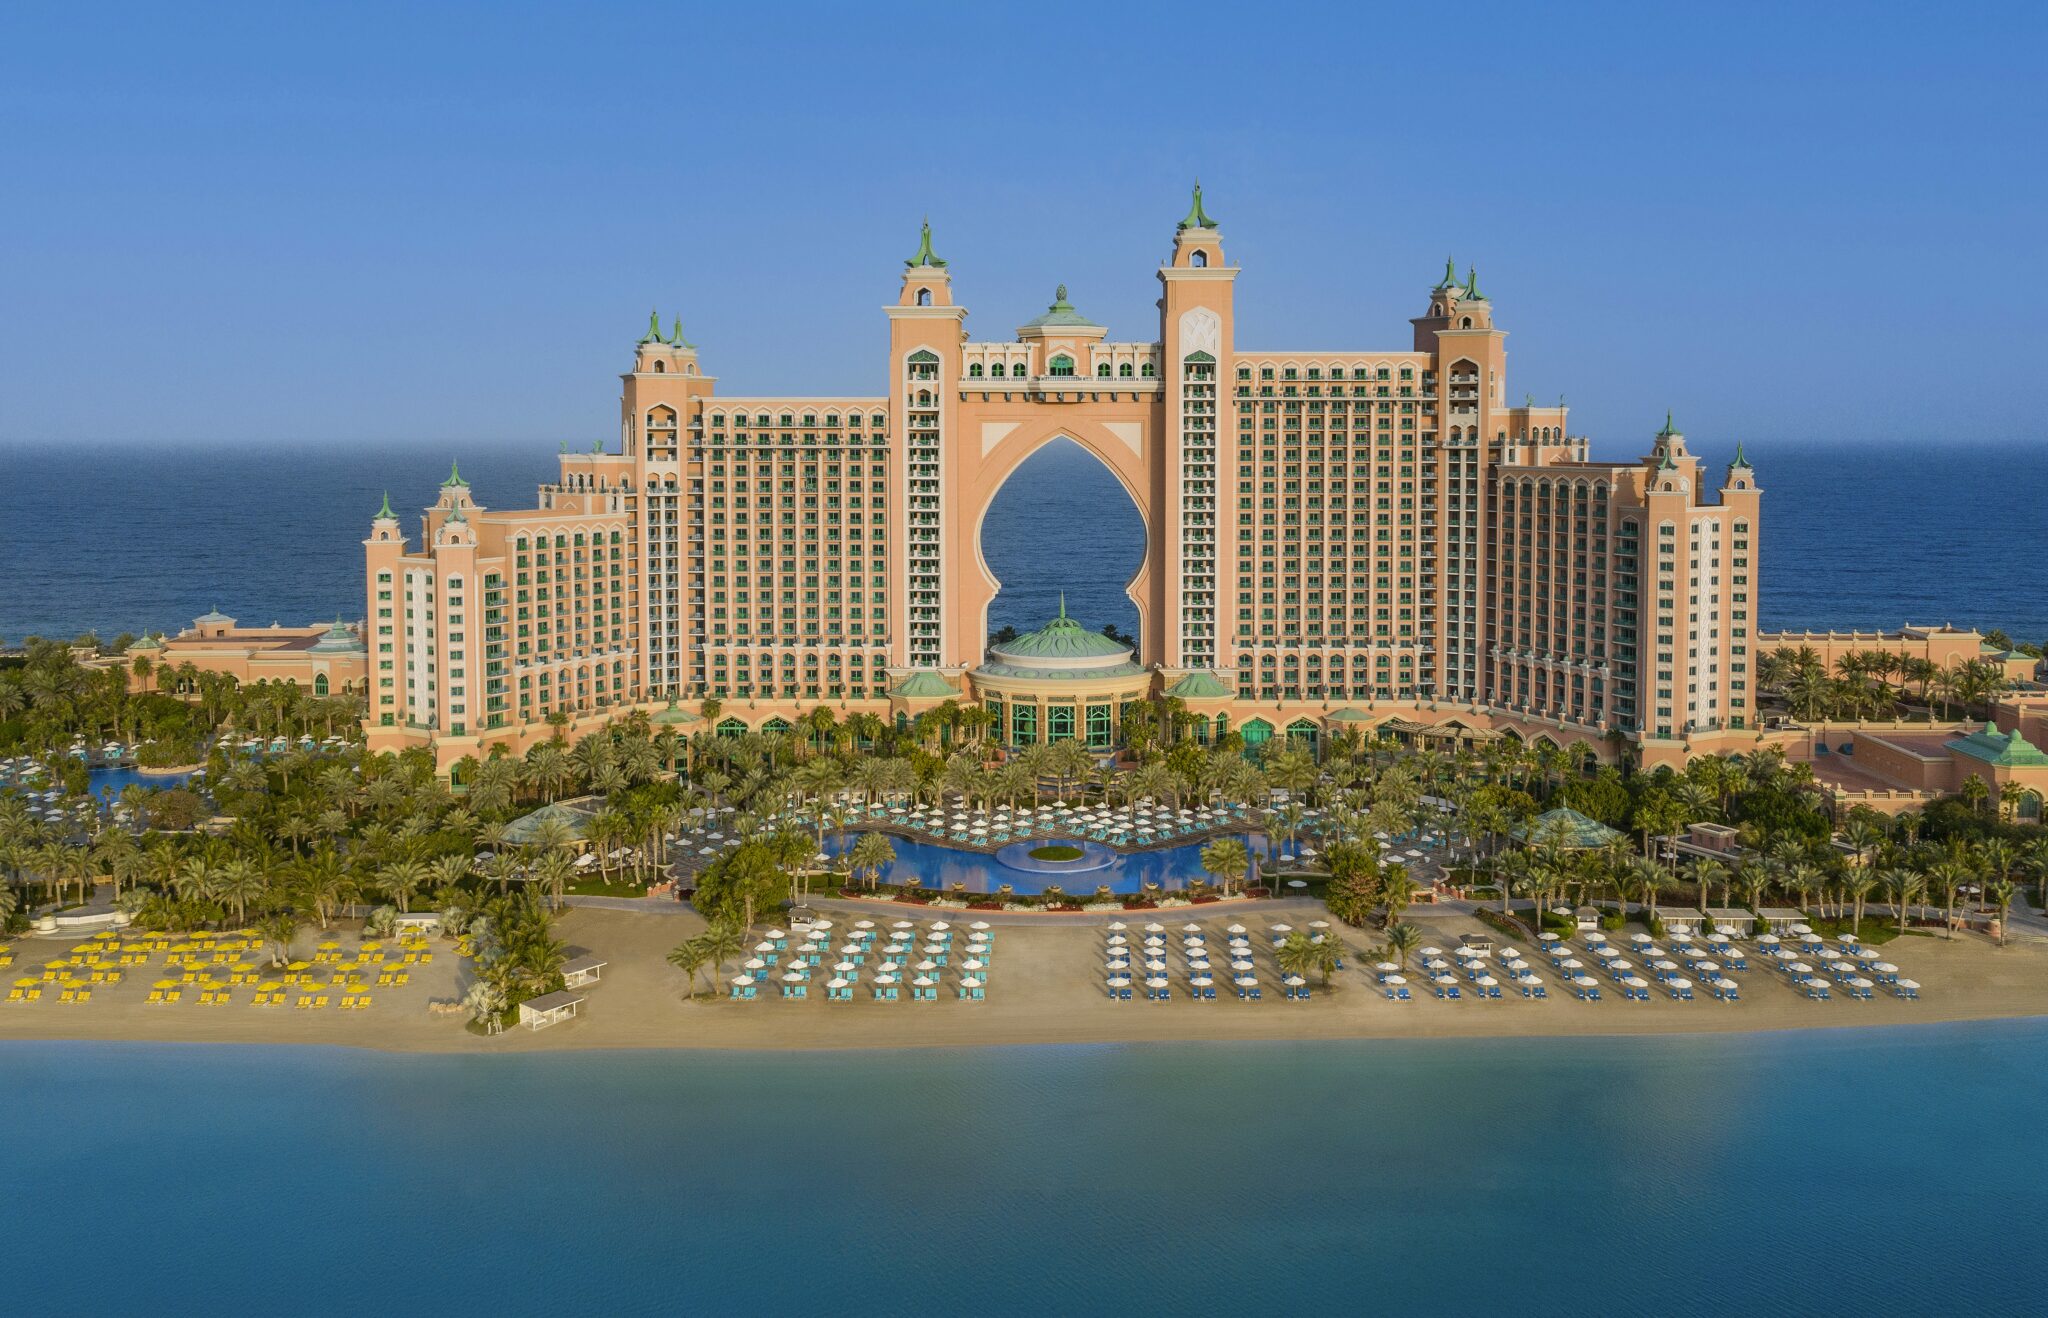 Image of the Atlantis, the Palm hotel during the daytime